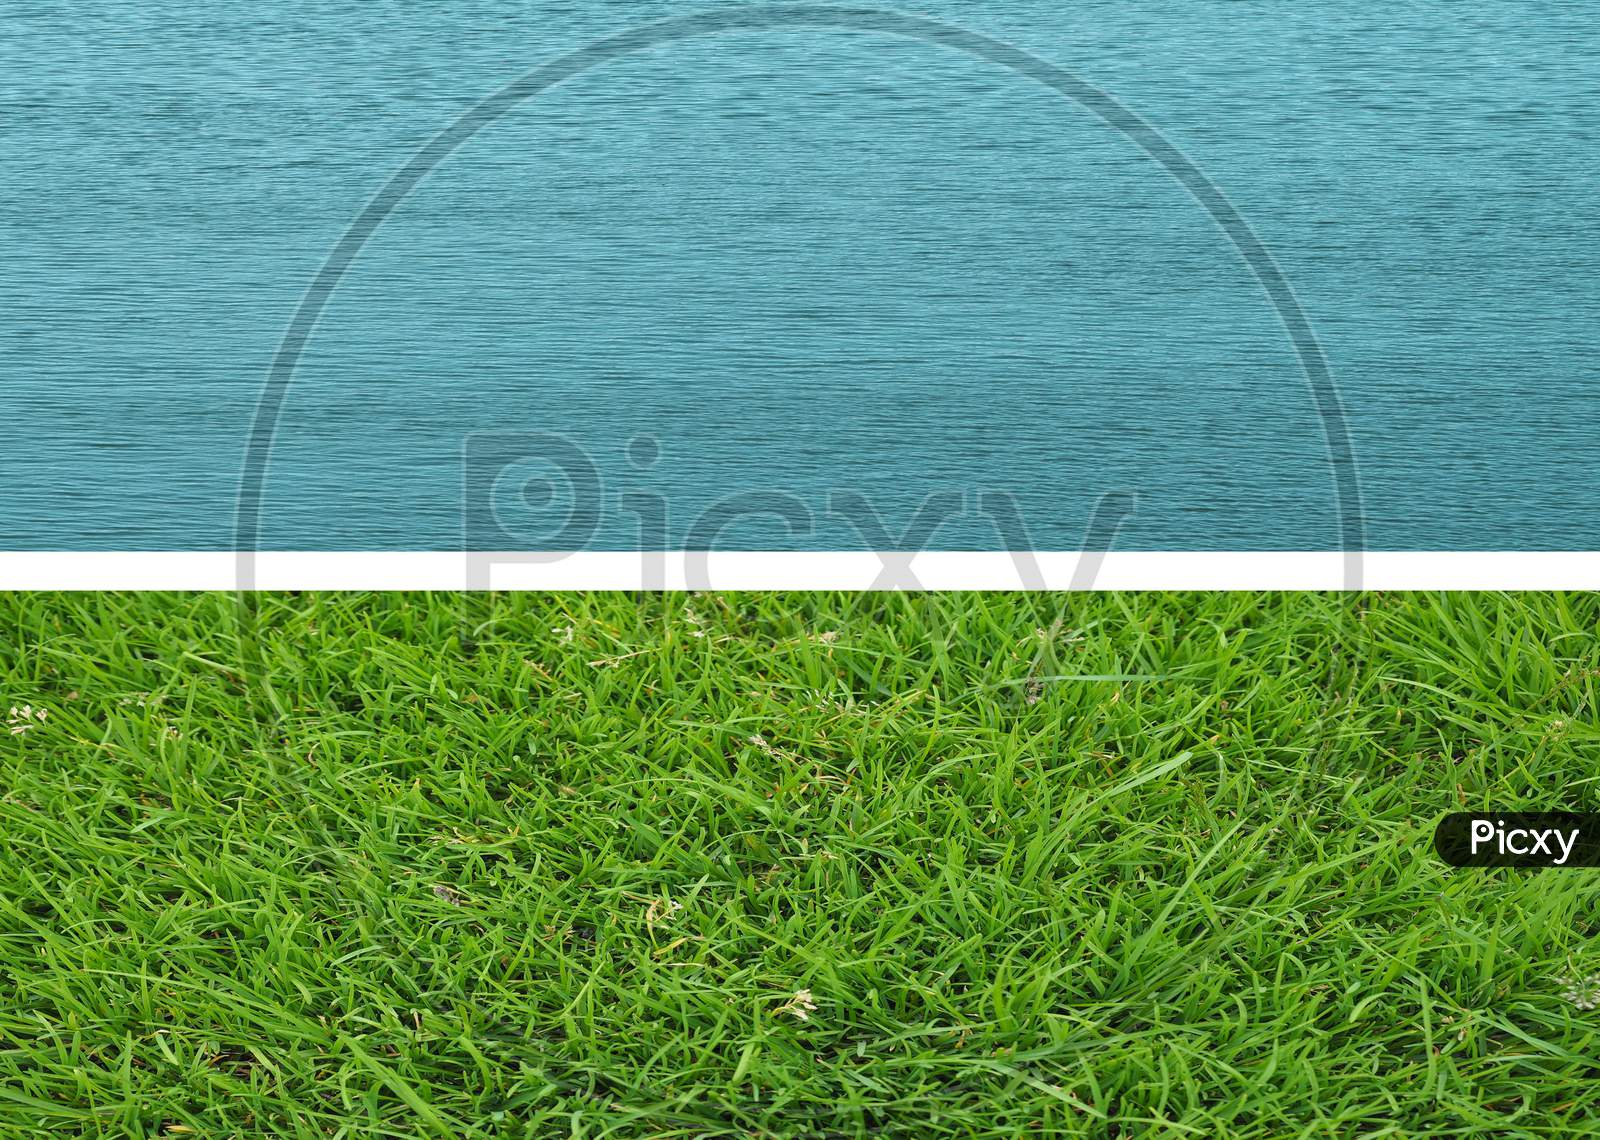 Grass And Water Background